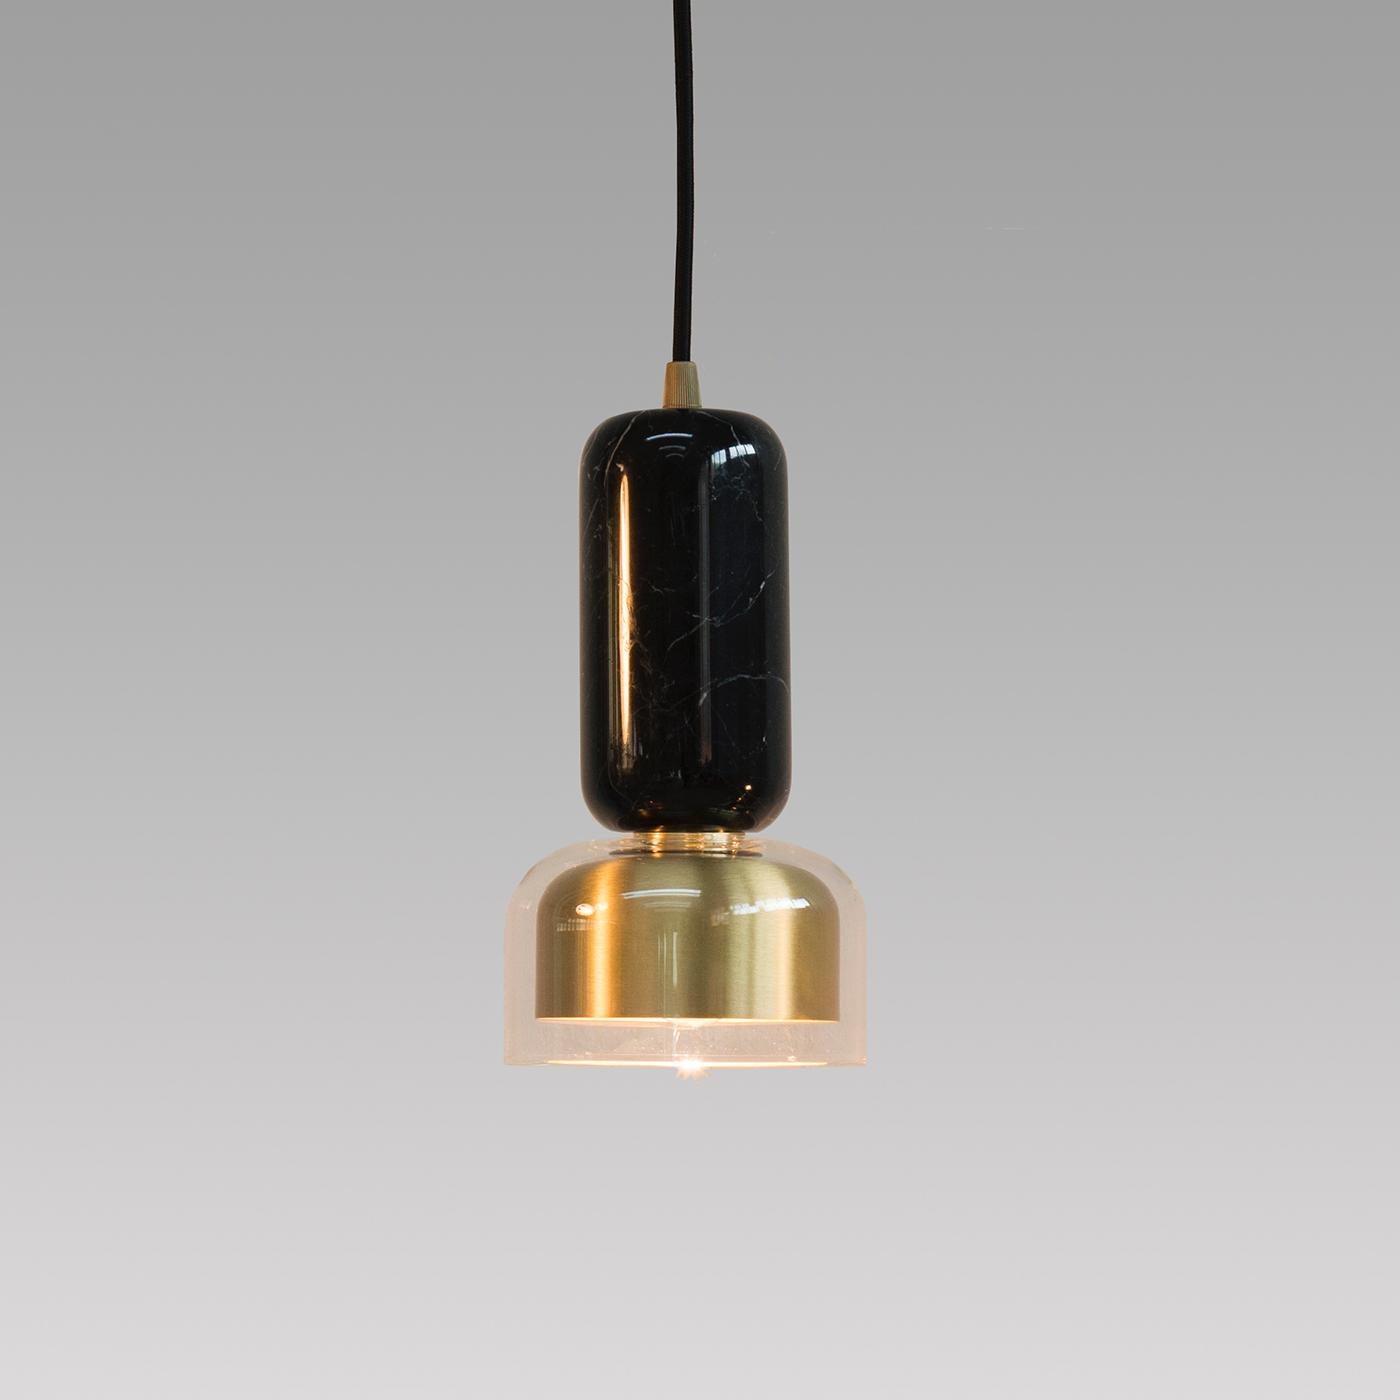 Andromeda pendant lamp is the result of a cooperation between Matlight Milano with Italian and international designers, to take advantage of increasingly creative use of marble and stone in the lighting industry. Andromeda pendant lamp is designed